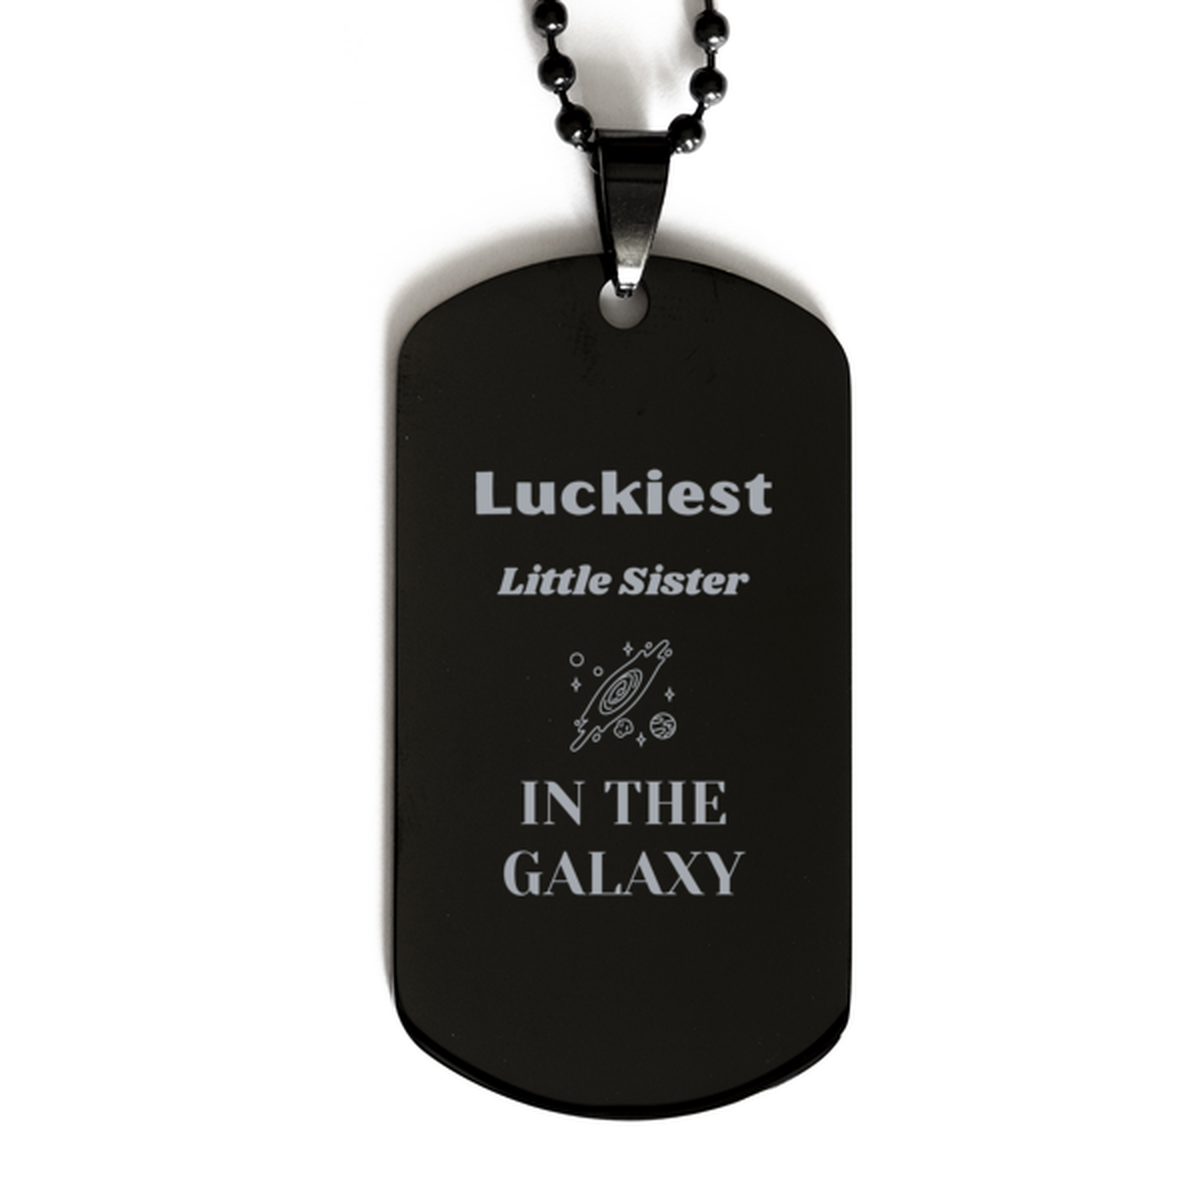 Luckiest Little Sister in the Galaxy, To My Little Sister Engraved Gifts, Christmas Little Sister Black Dog Tag Gifts, X-mas Birthday Unique Gifts For Little Sister Men Women